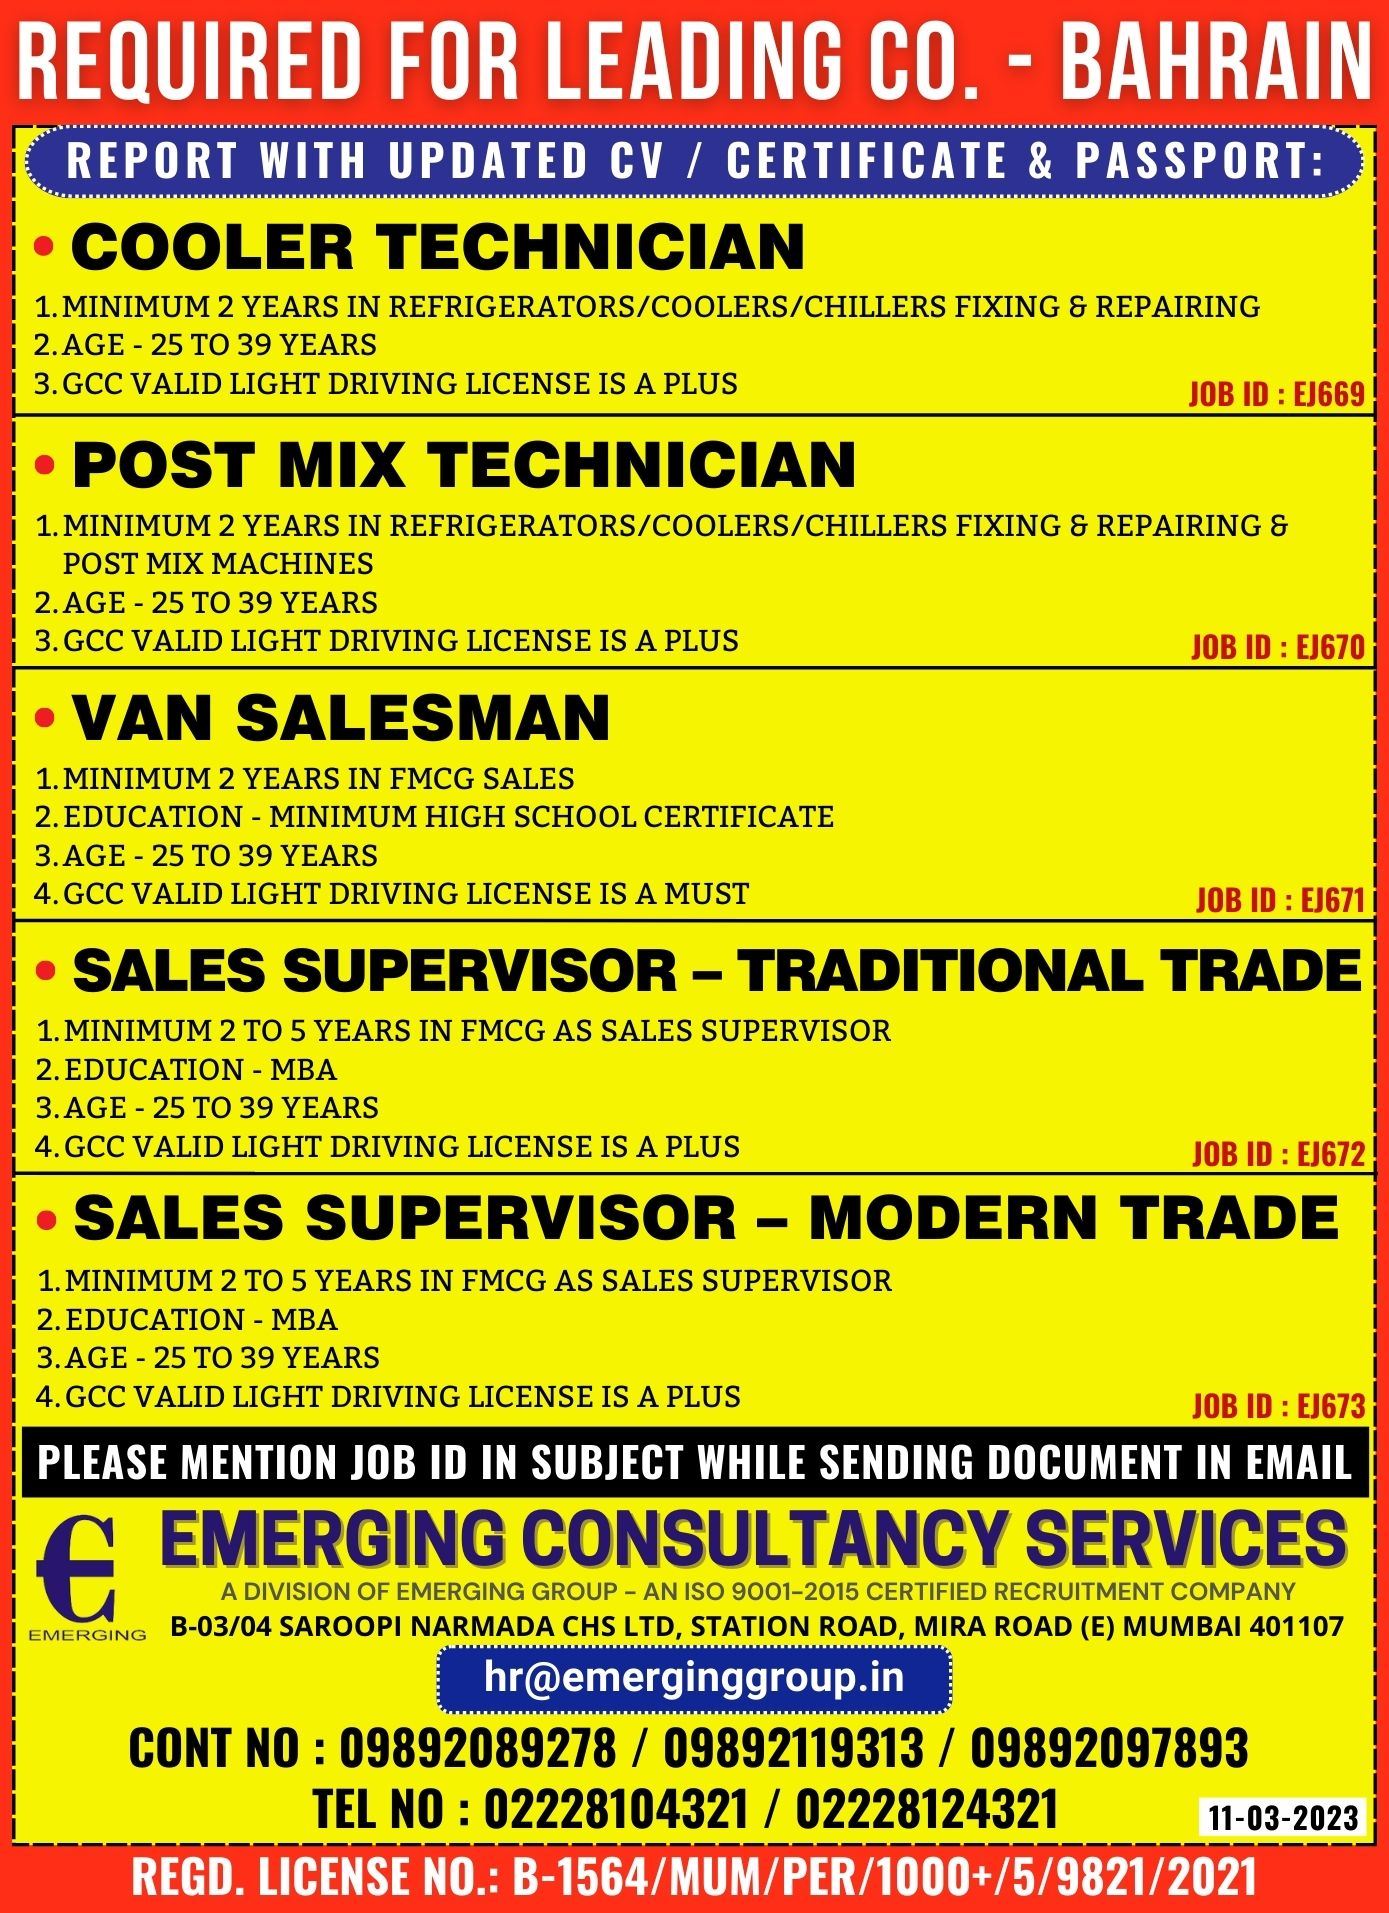 EMERGING CONSULTANCY SERVICES-ab3c413a